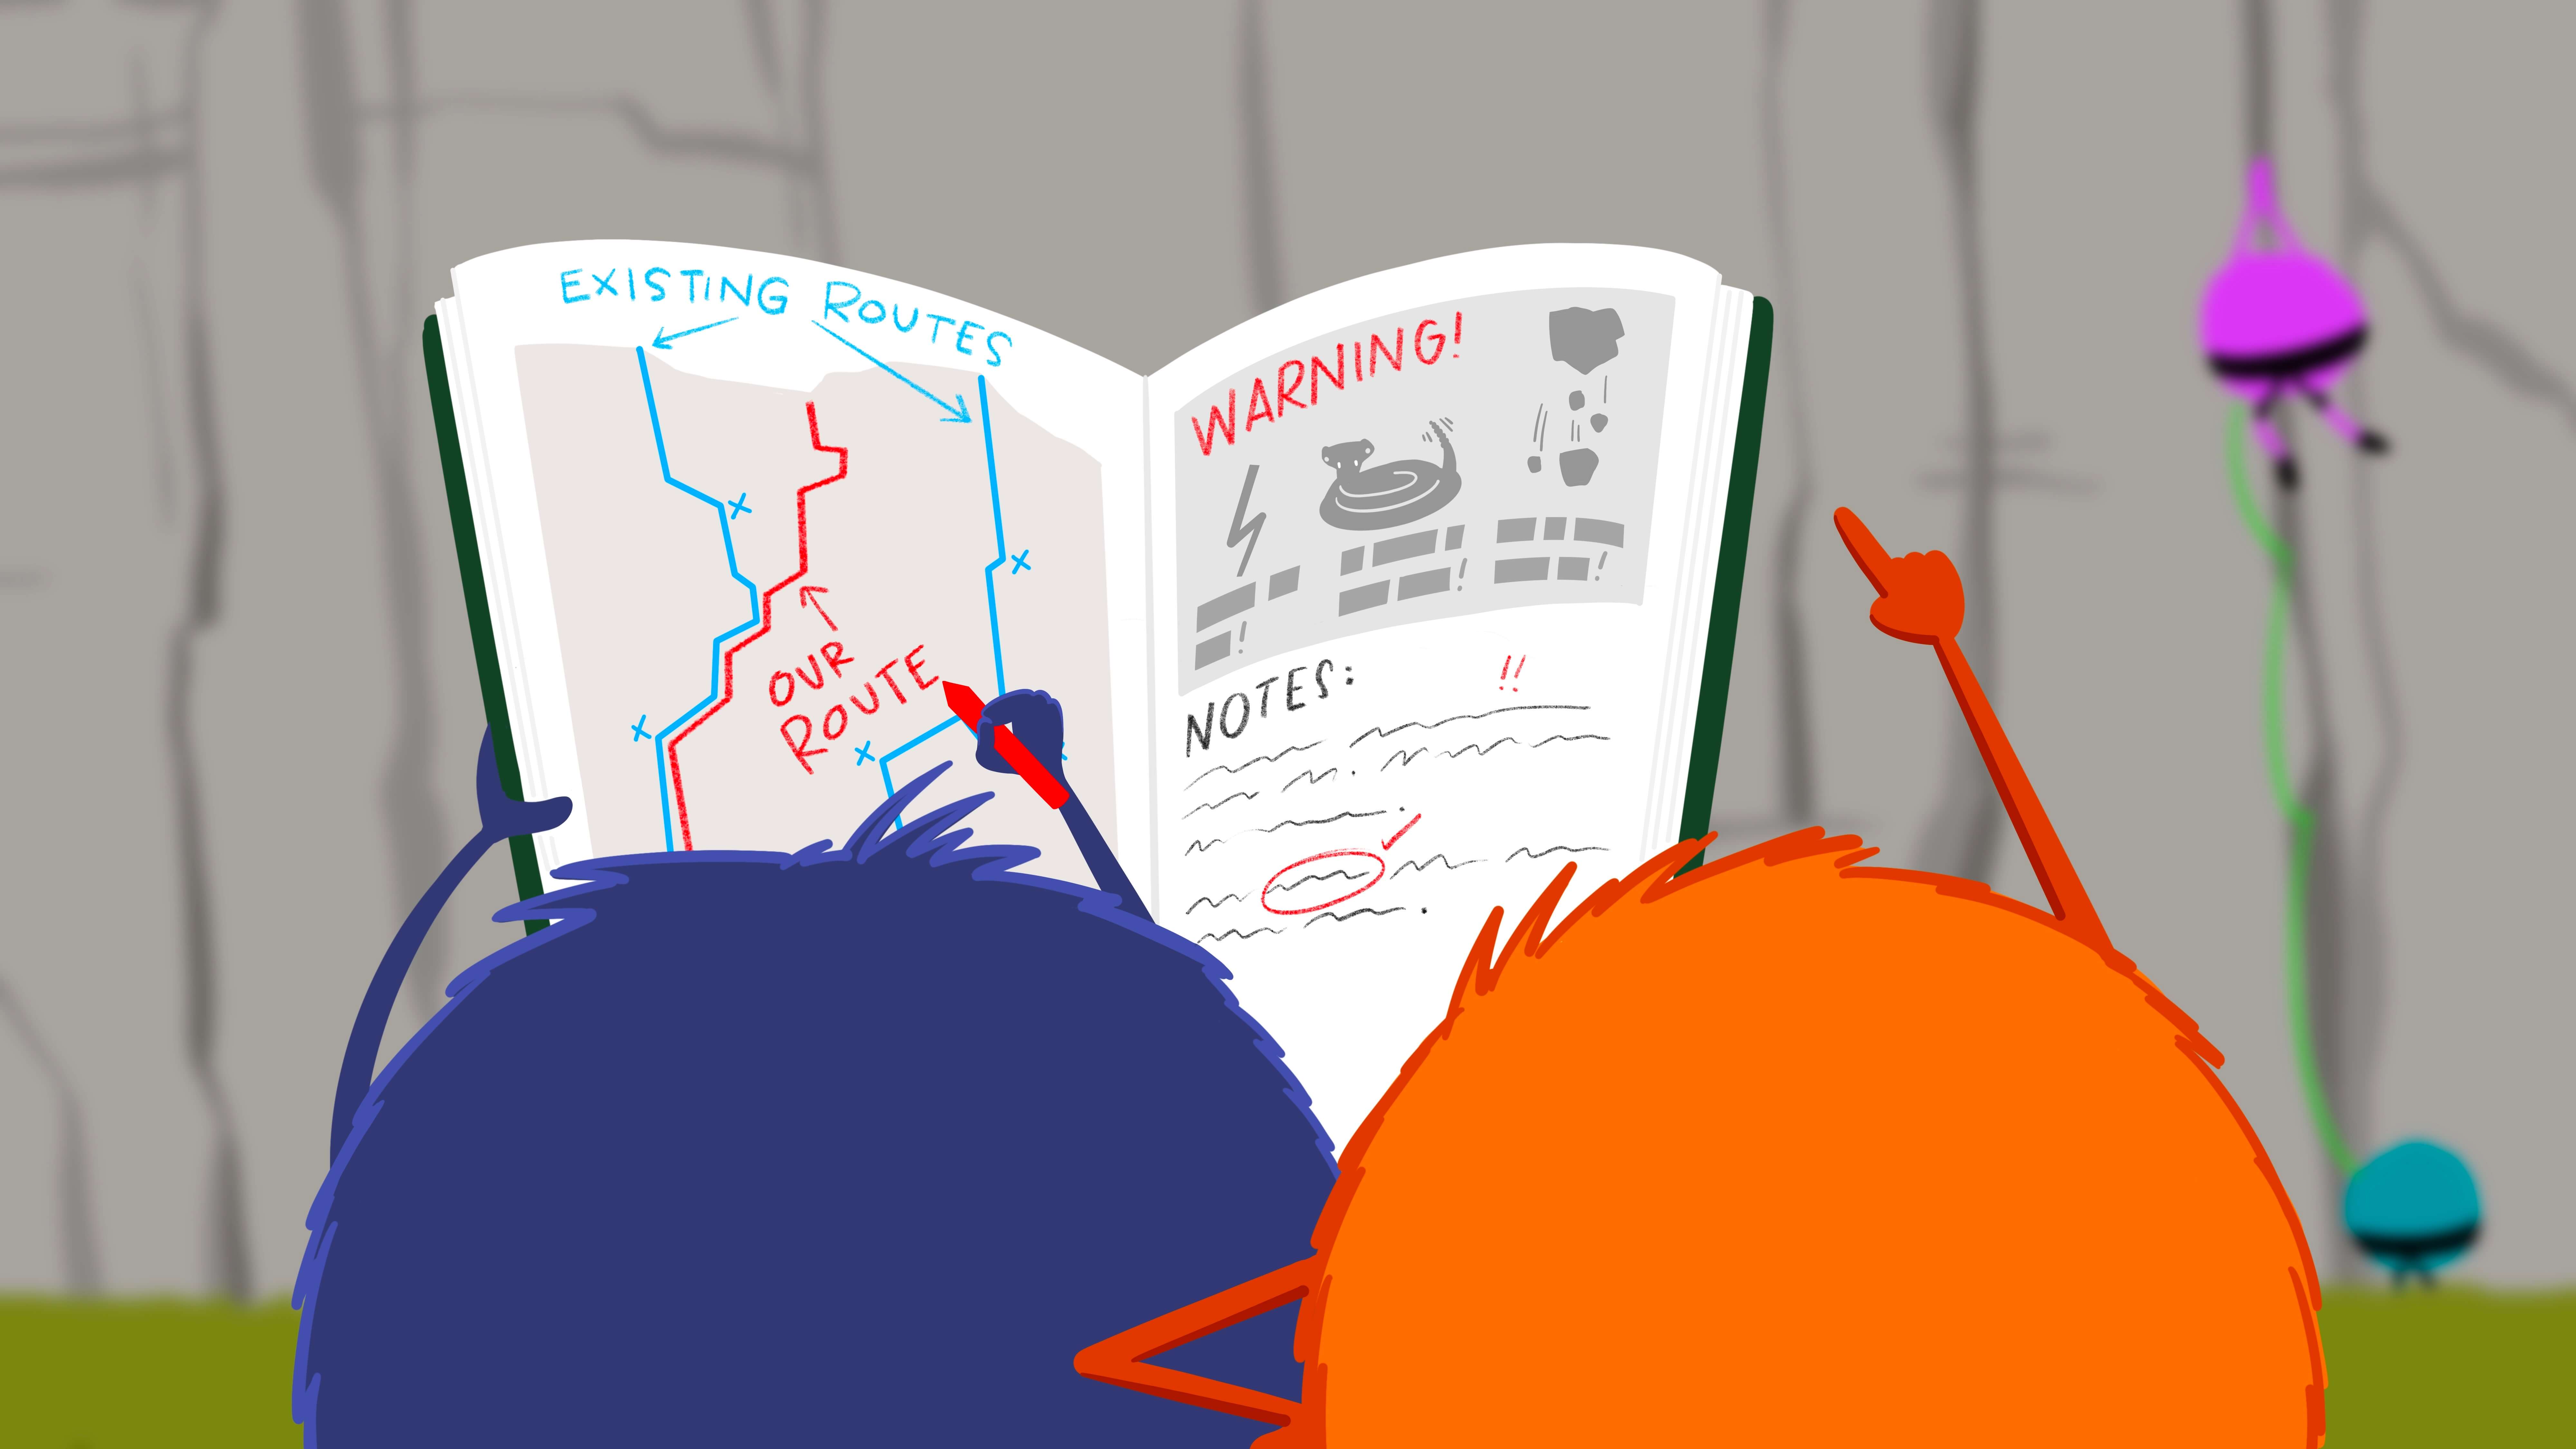 Two monsters consult a book with routes labeled